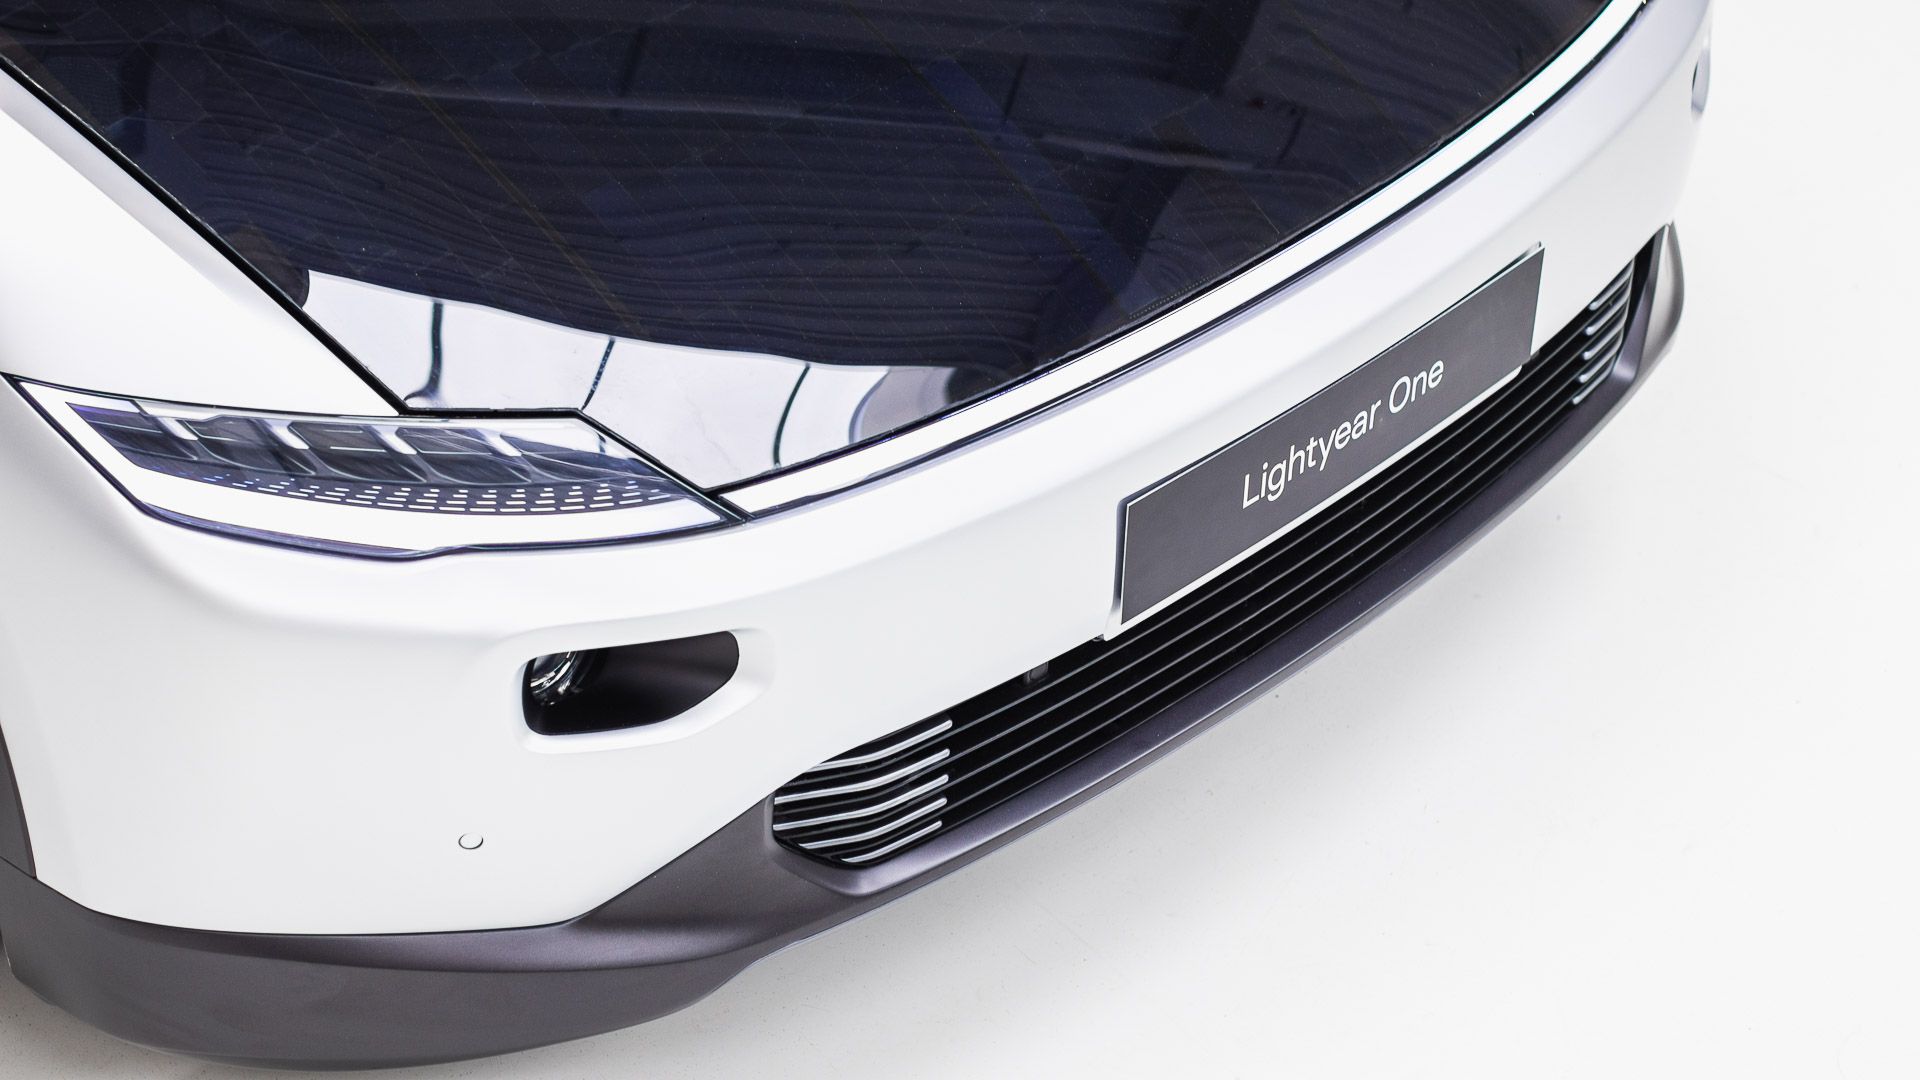 2022 Lightyear One Solar Electric Car - Is It Lightyears ahead of the Competition?